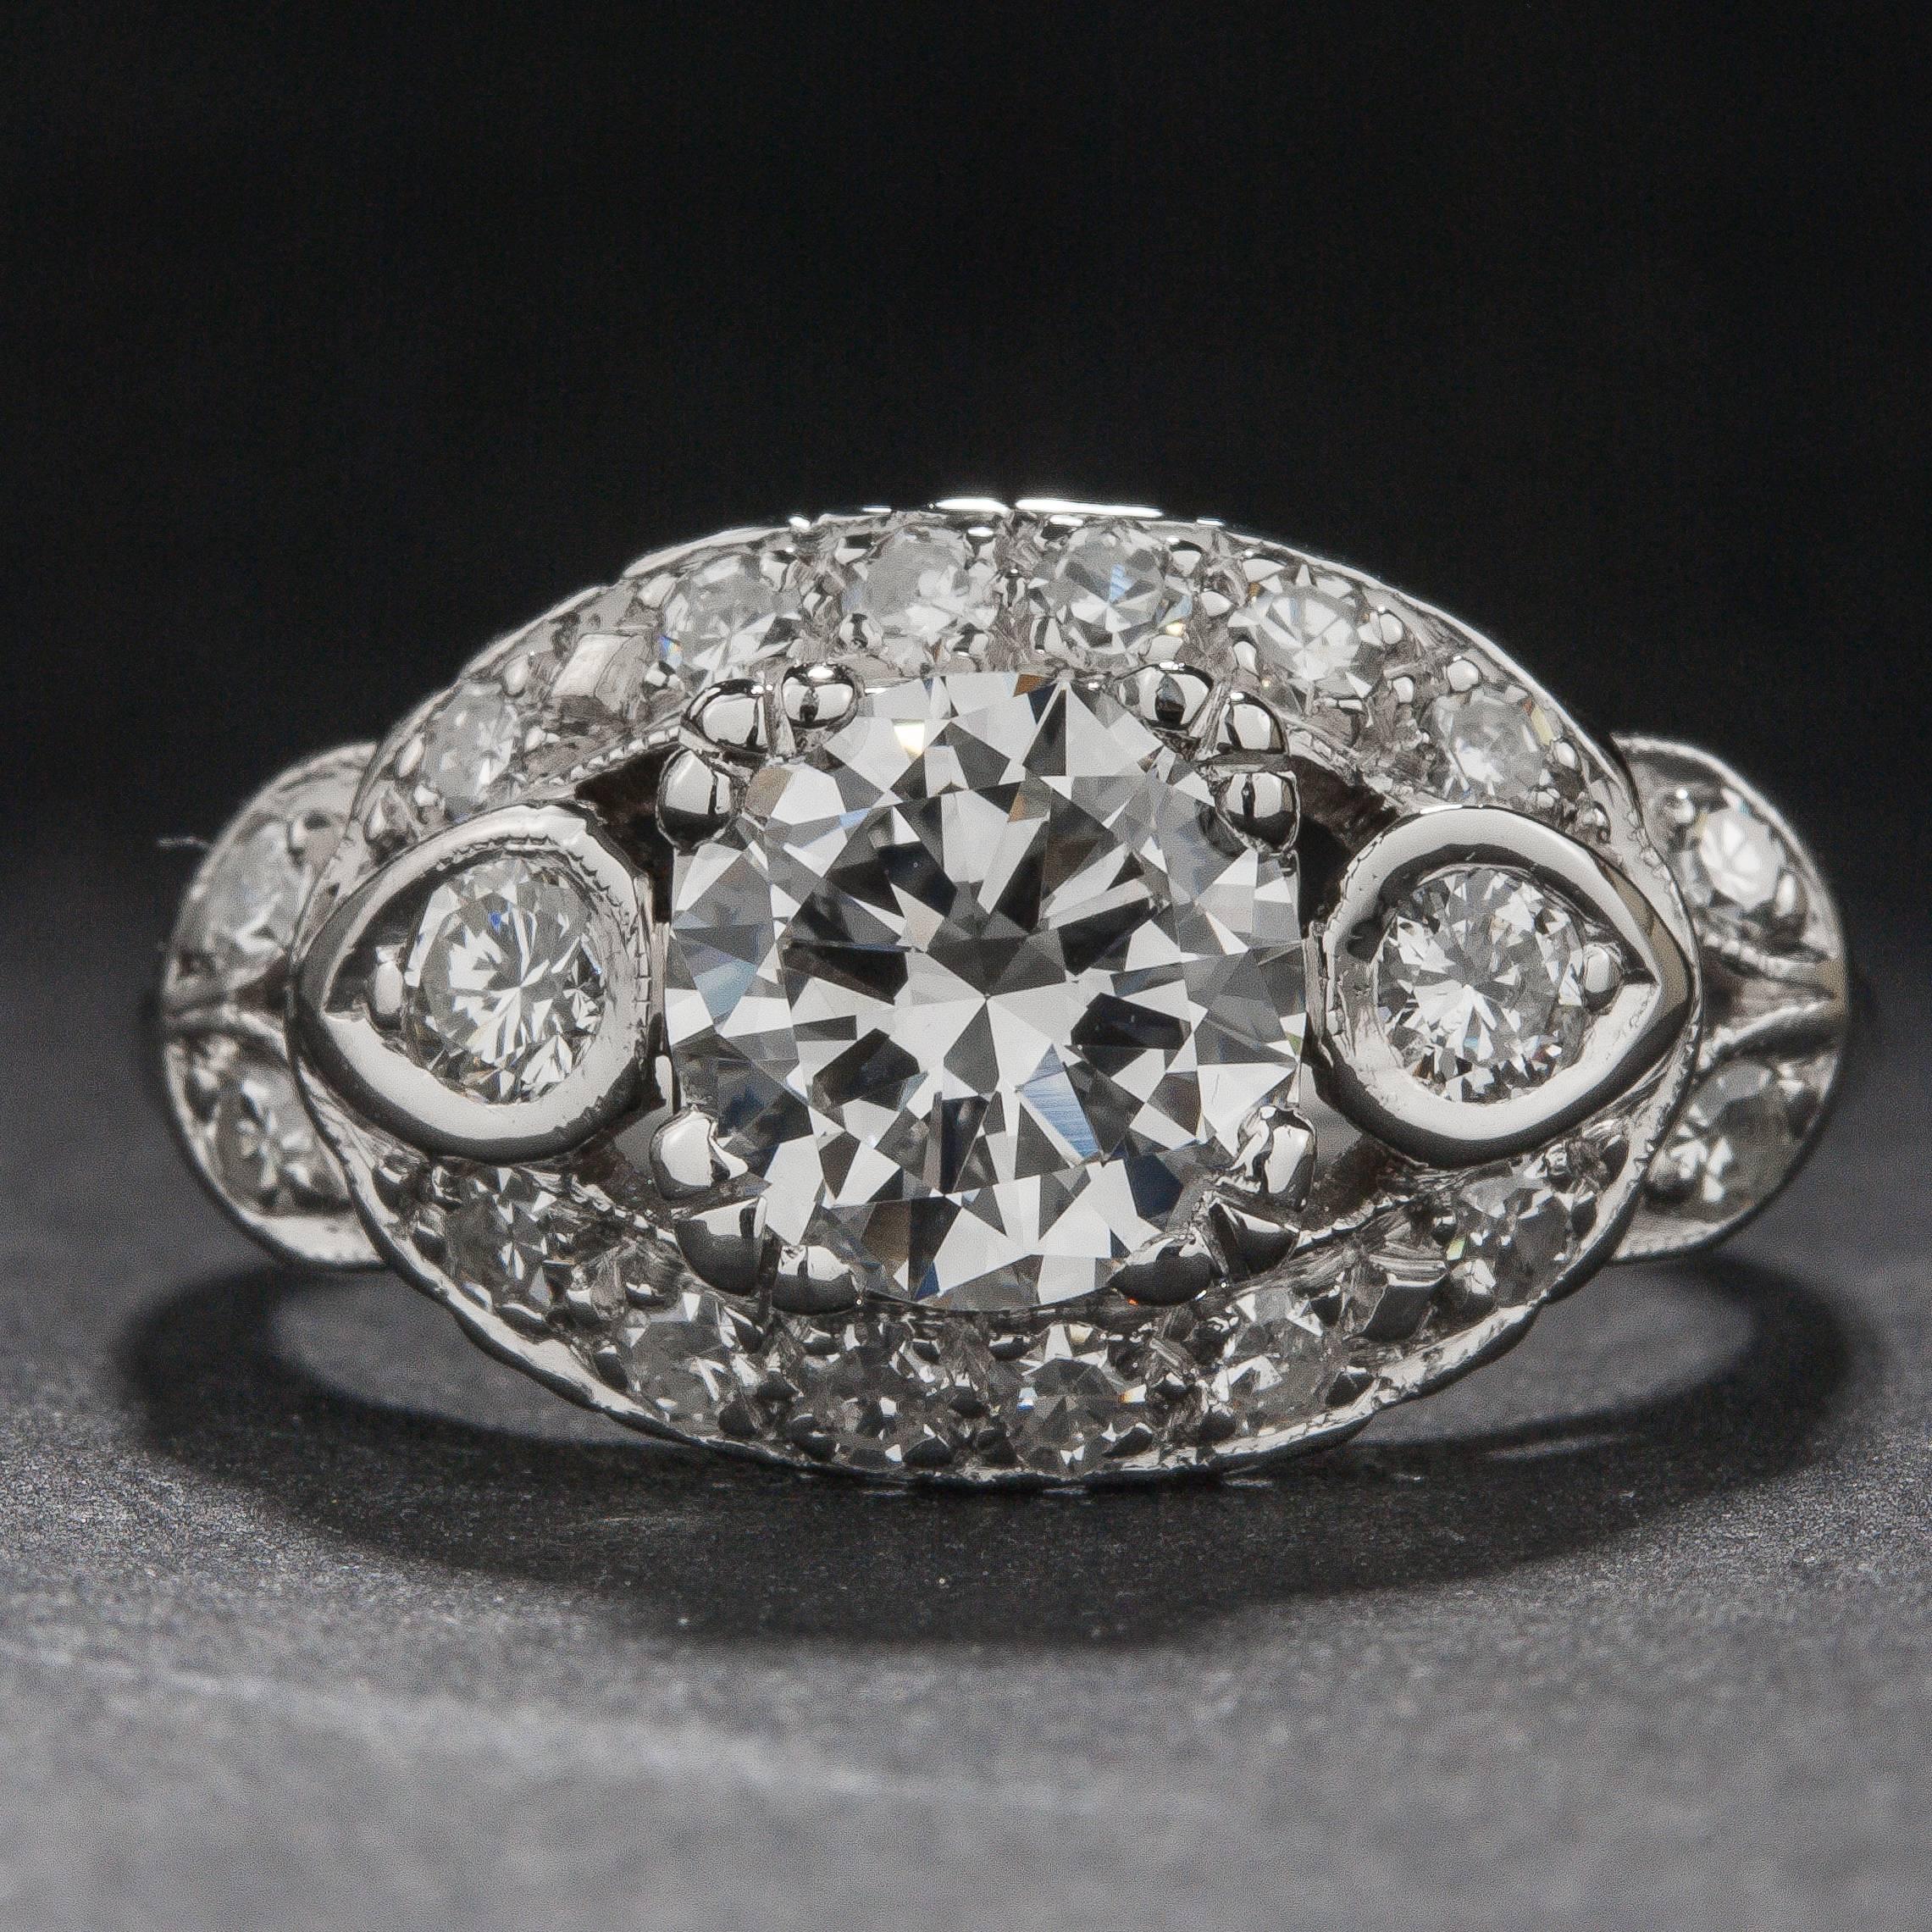 This stunning Art Deco style ring features a .90 carat center diamond and 18 side diamonds for a total of .22 carats. The intricate mounting has been crafted in platinum and the ring is currently size 6.5.